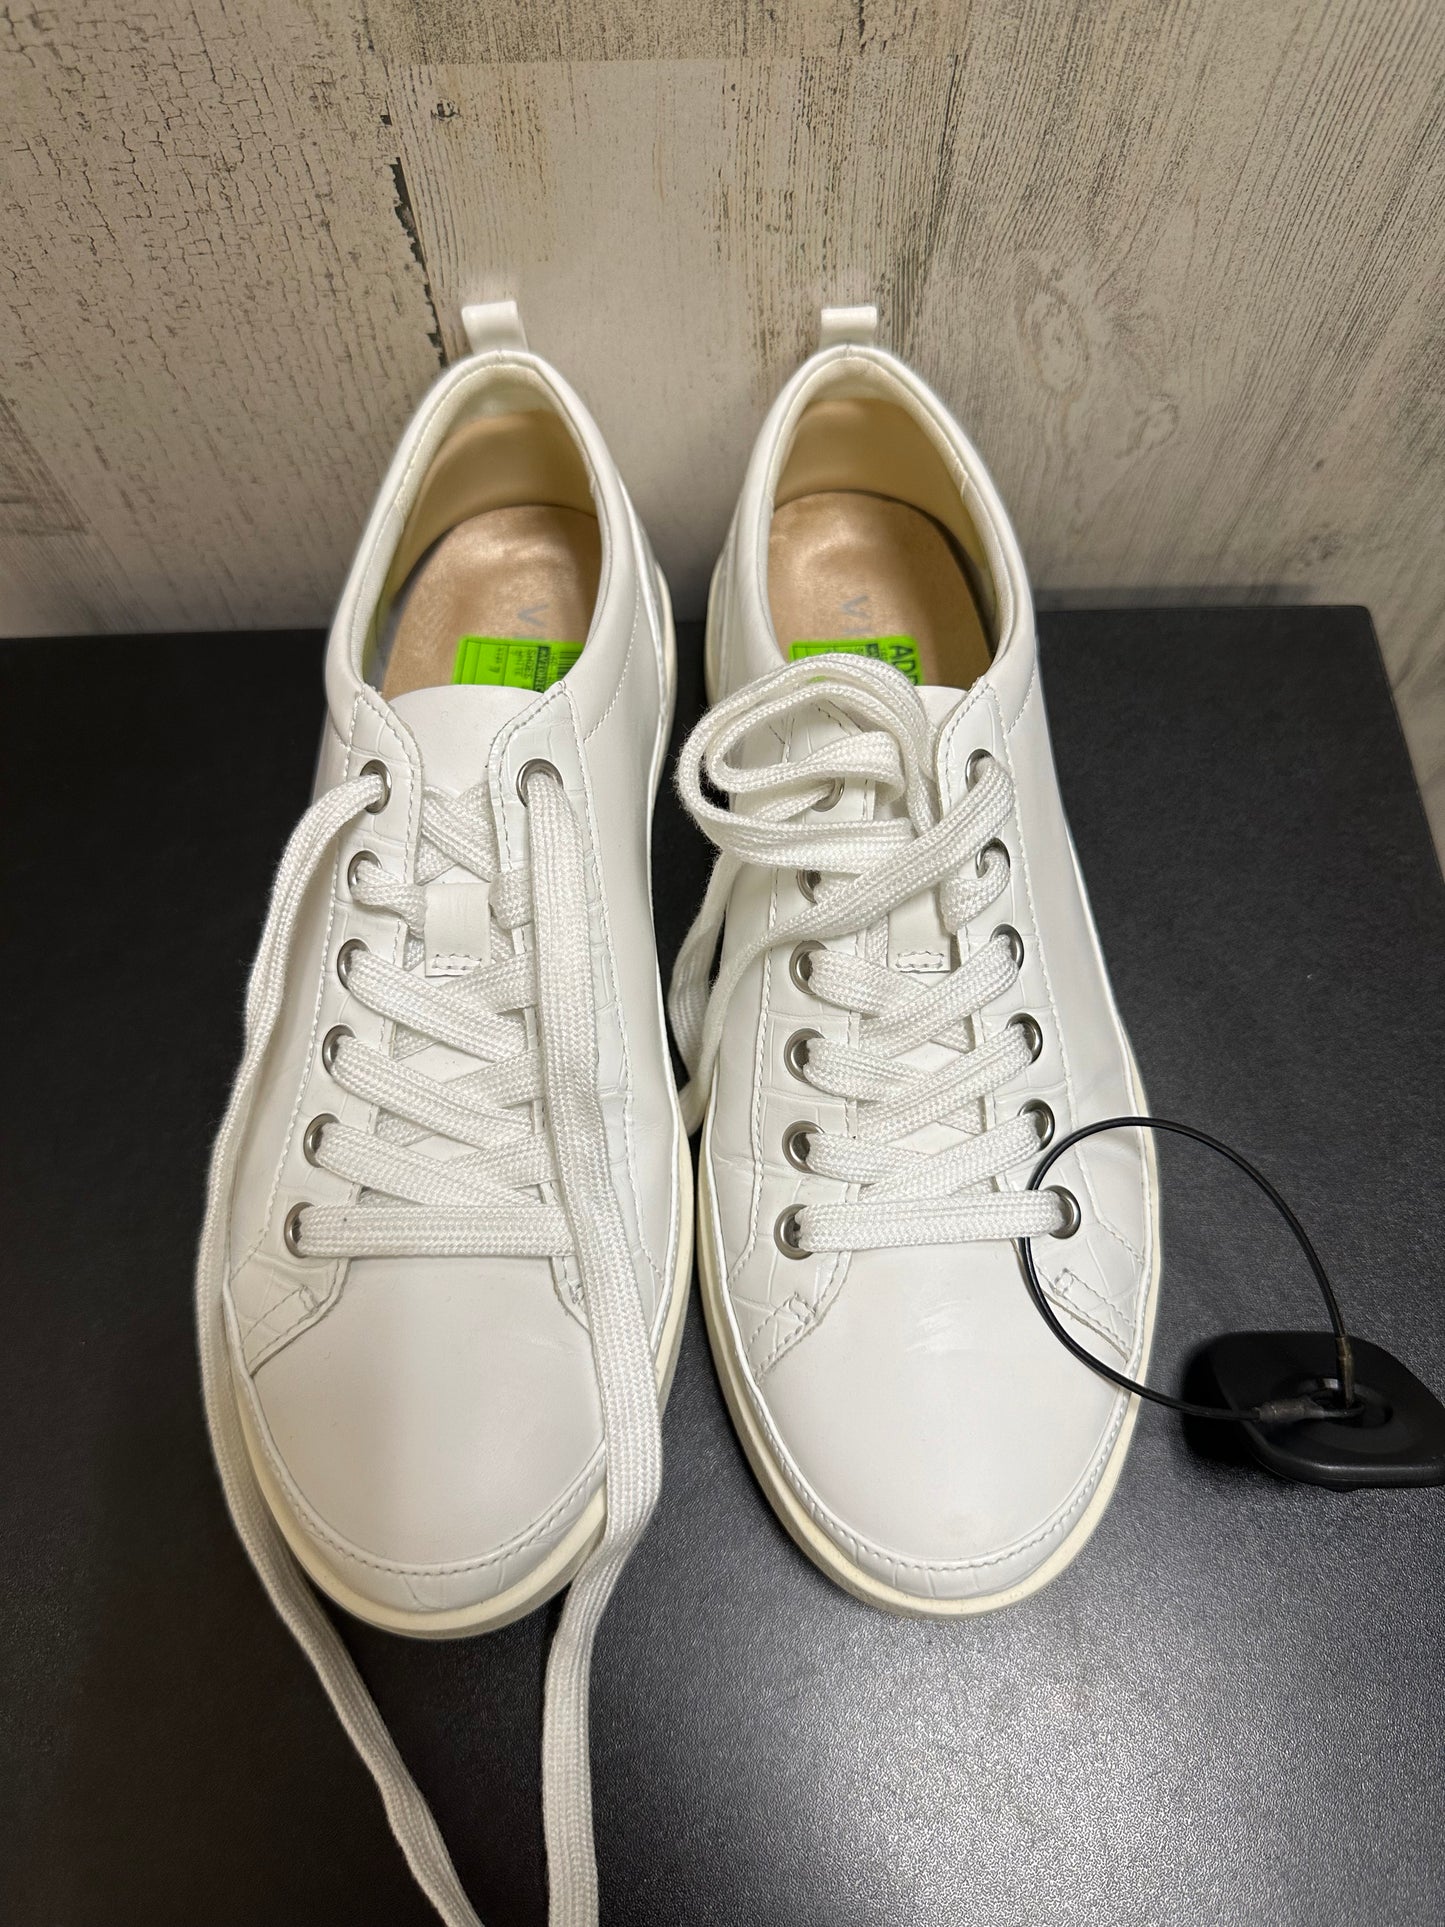 White Shoes Sneakers Vionic, Size 7